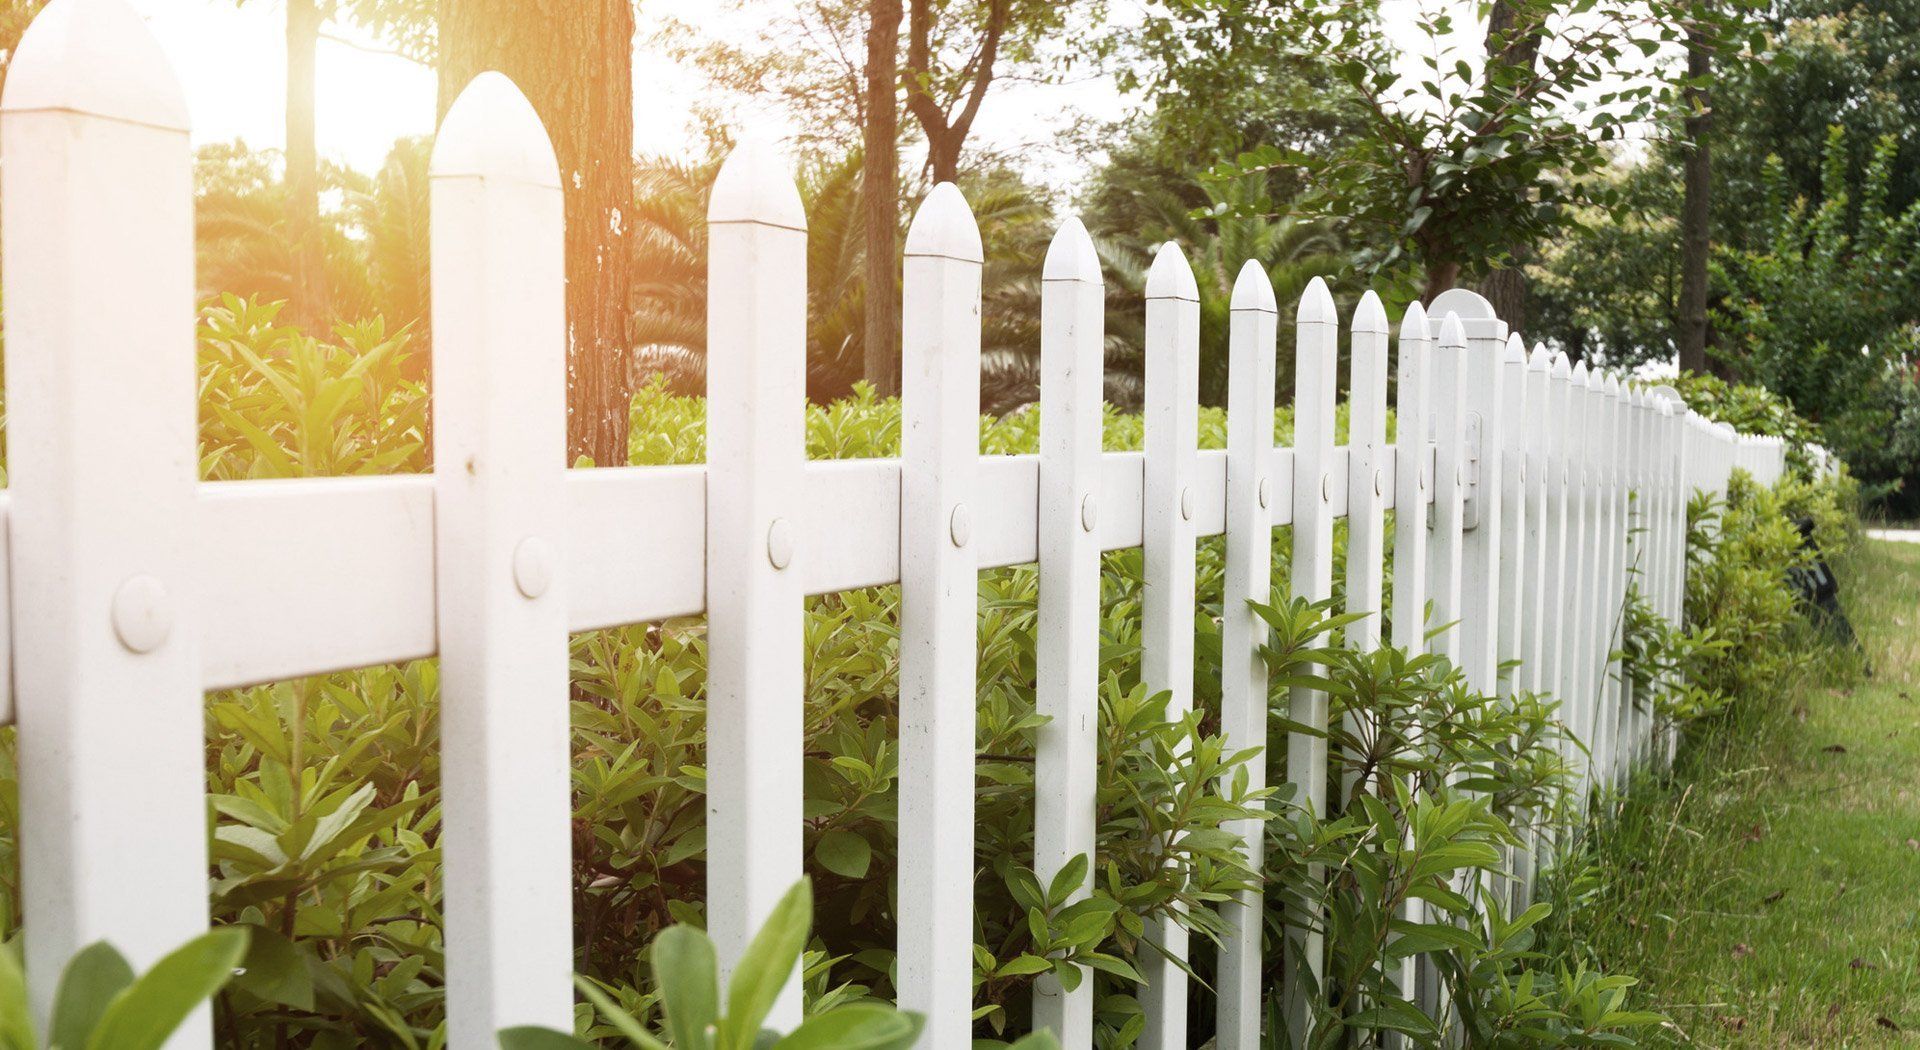 Protect your commercial property with sturdy fences